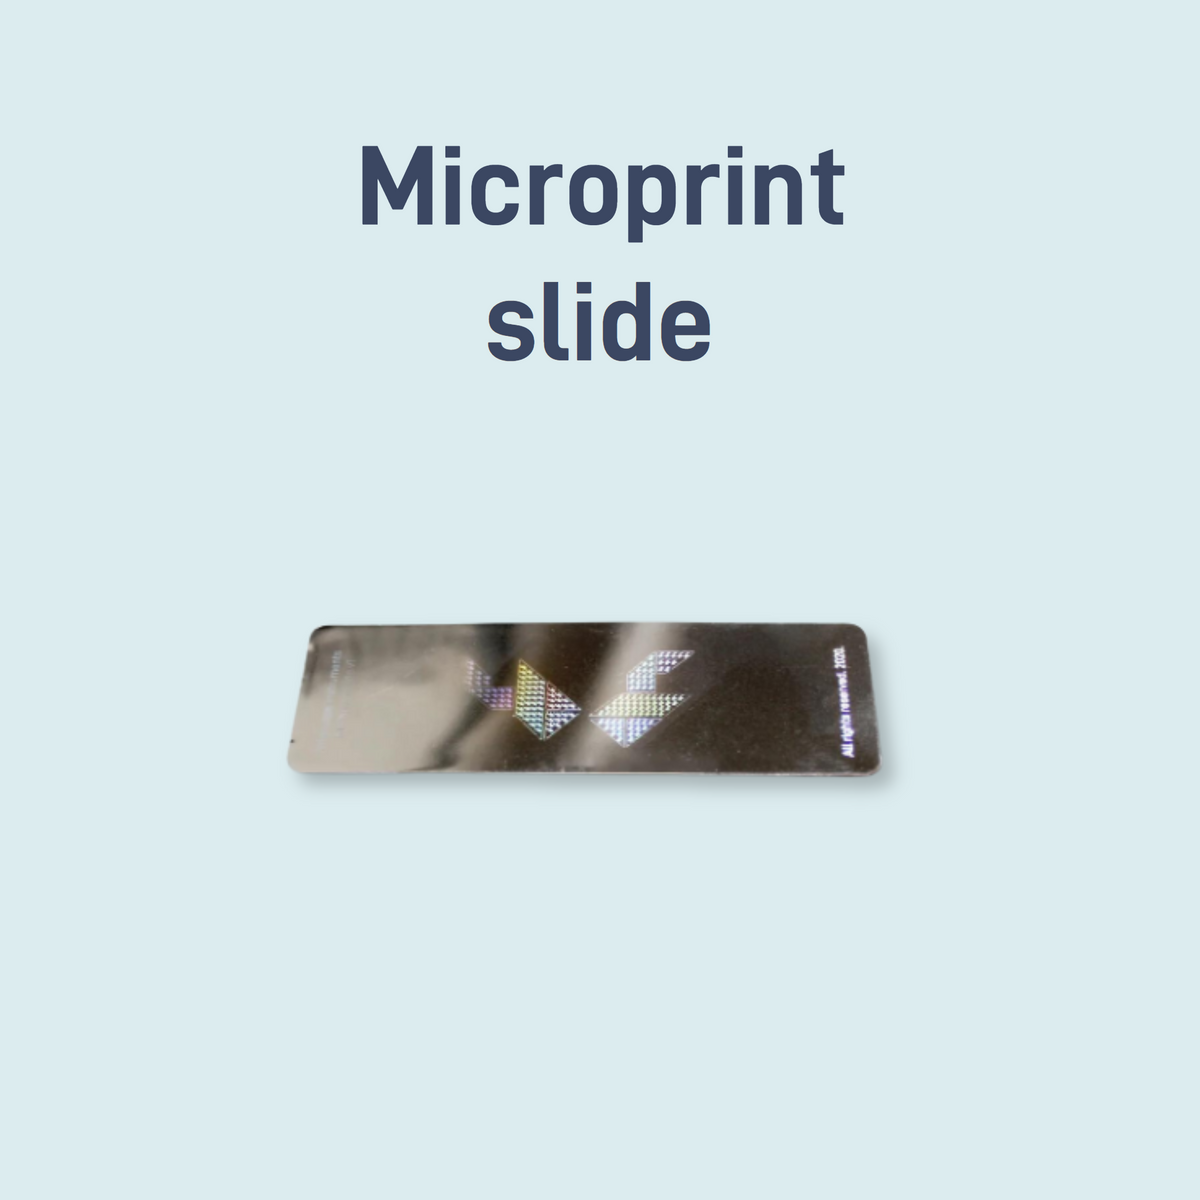 Assembled Individual Kit (1 Foldscope Paper Microscope)  Holiday Savings Event! - Save 15% effective 11/5/23 - 12/17/23